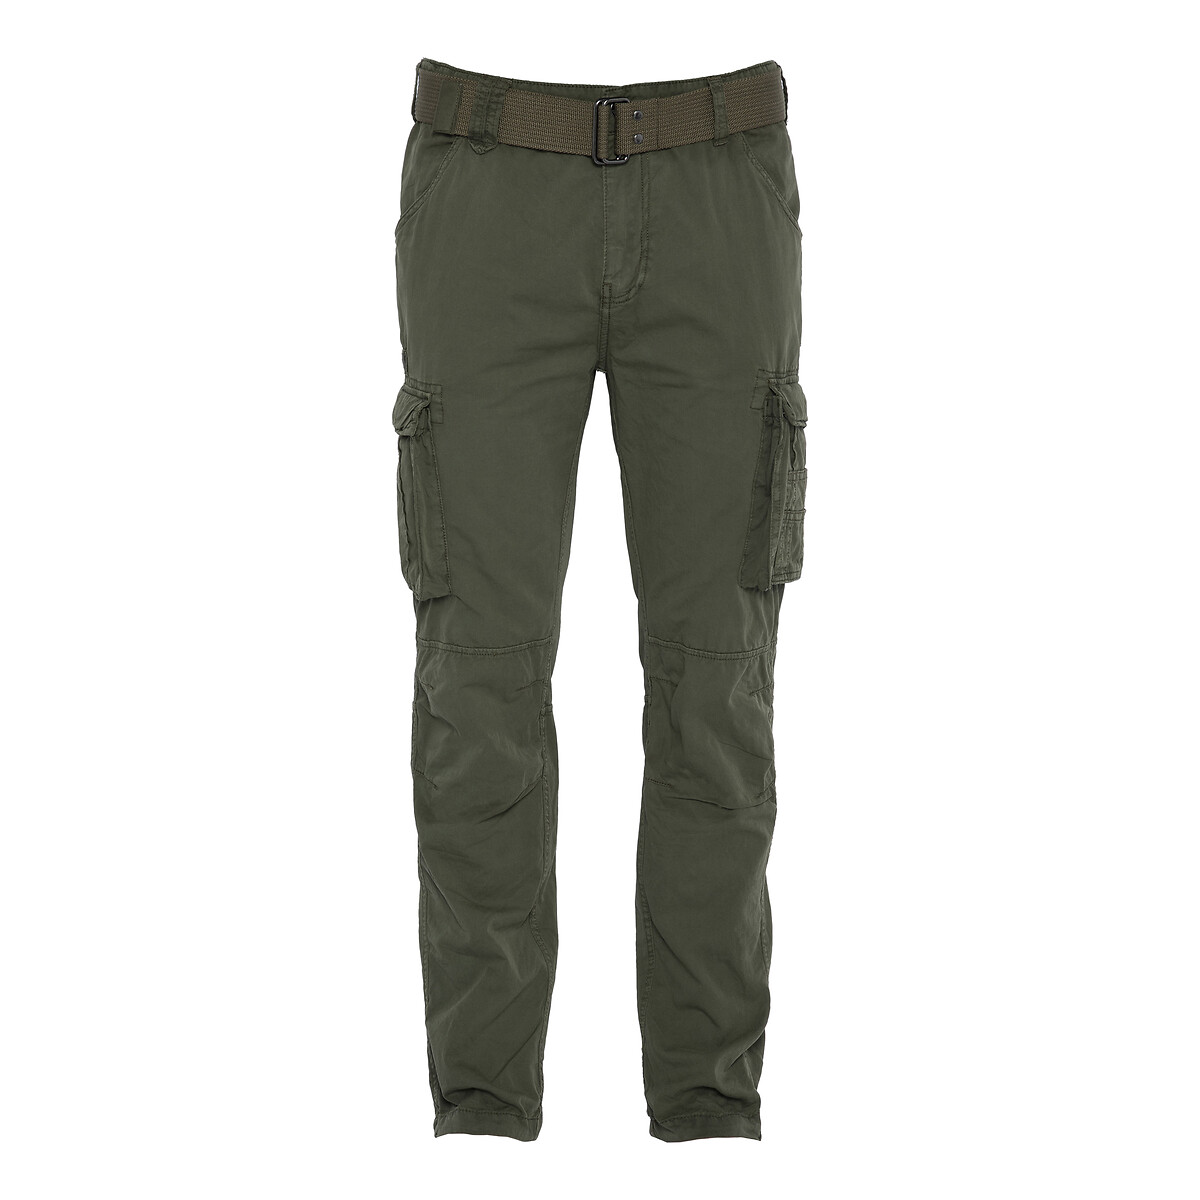 tr ranger 70 cargo trousers in cotton with belt